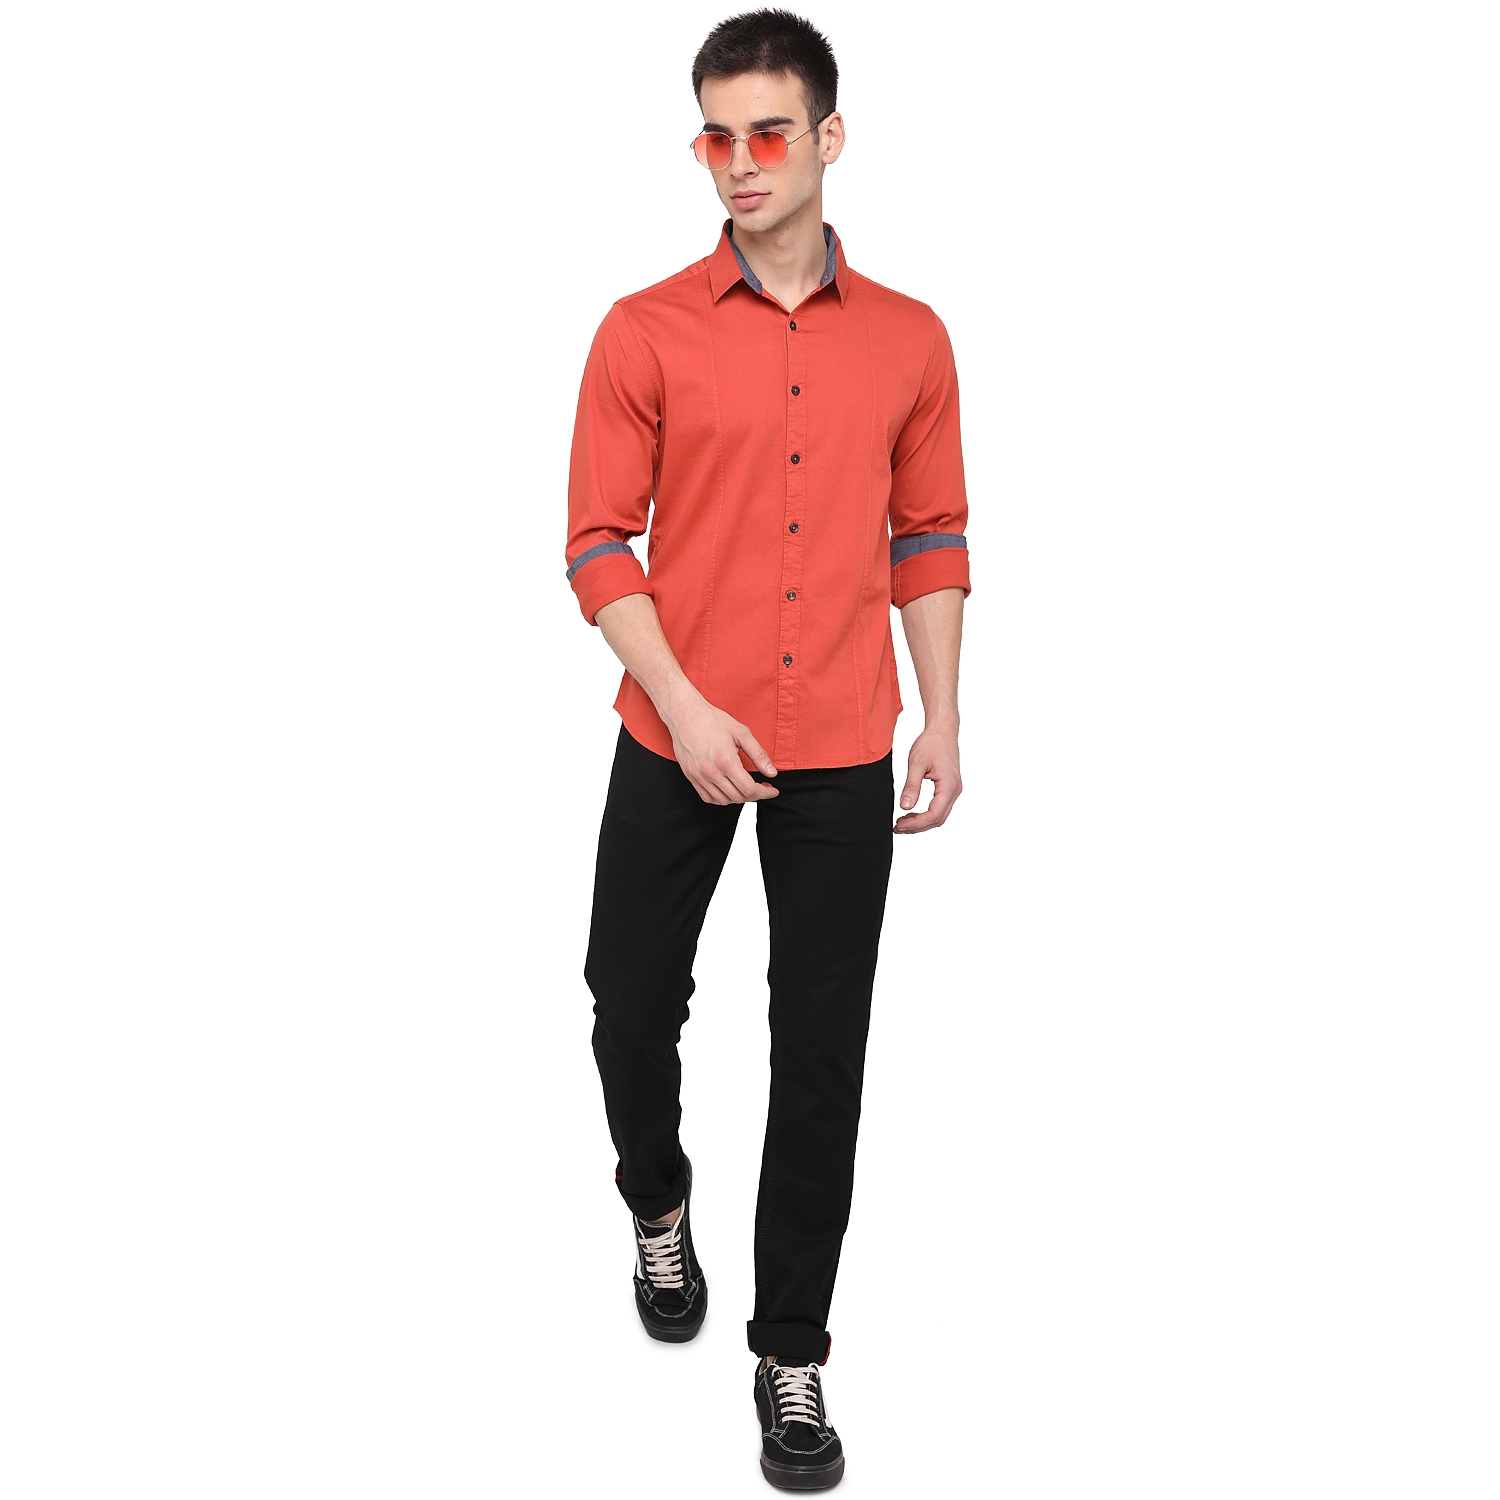 Greenfibre | Spicy Orange Solid Slim Fit Casual Shirt | Greenfibre 3